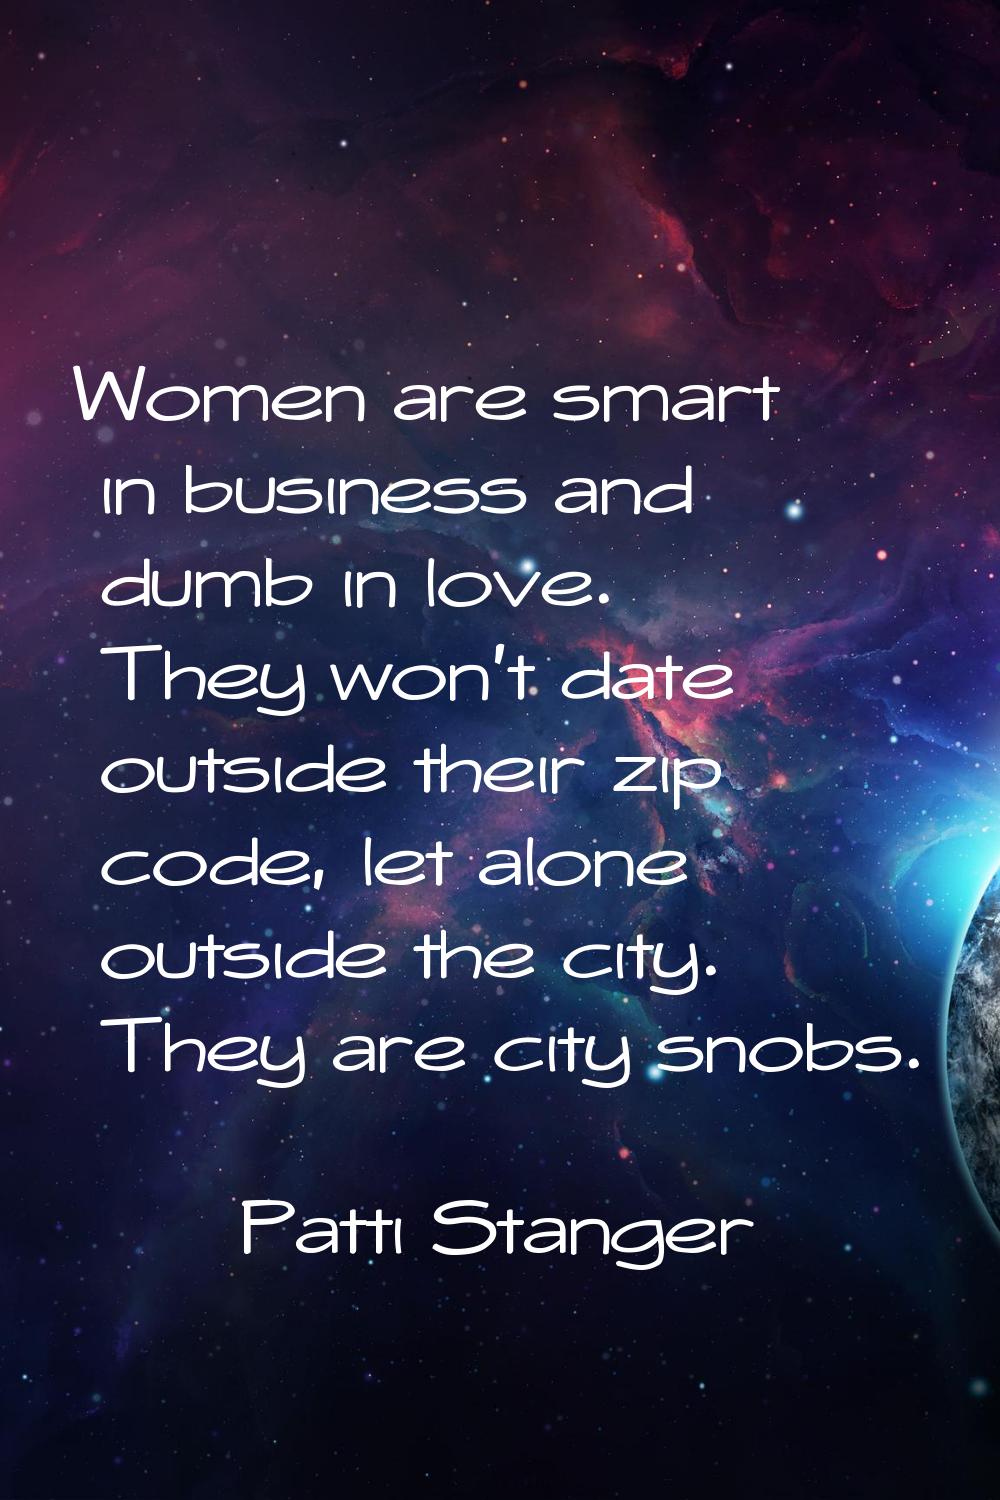 Women are smart in business and dumb in love. They won't date outside their zip code, let alone out